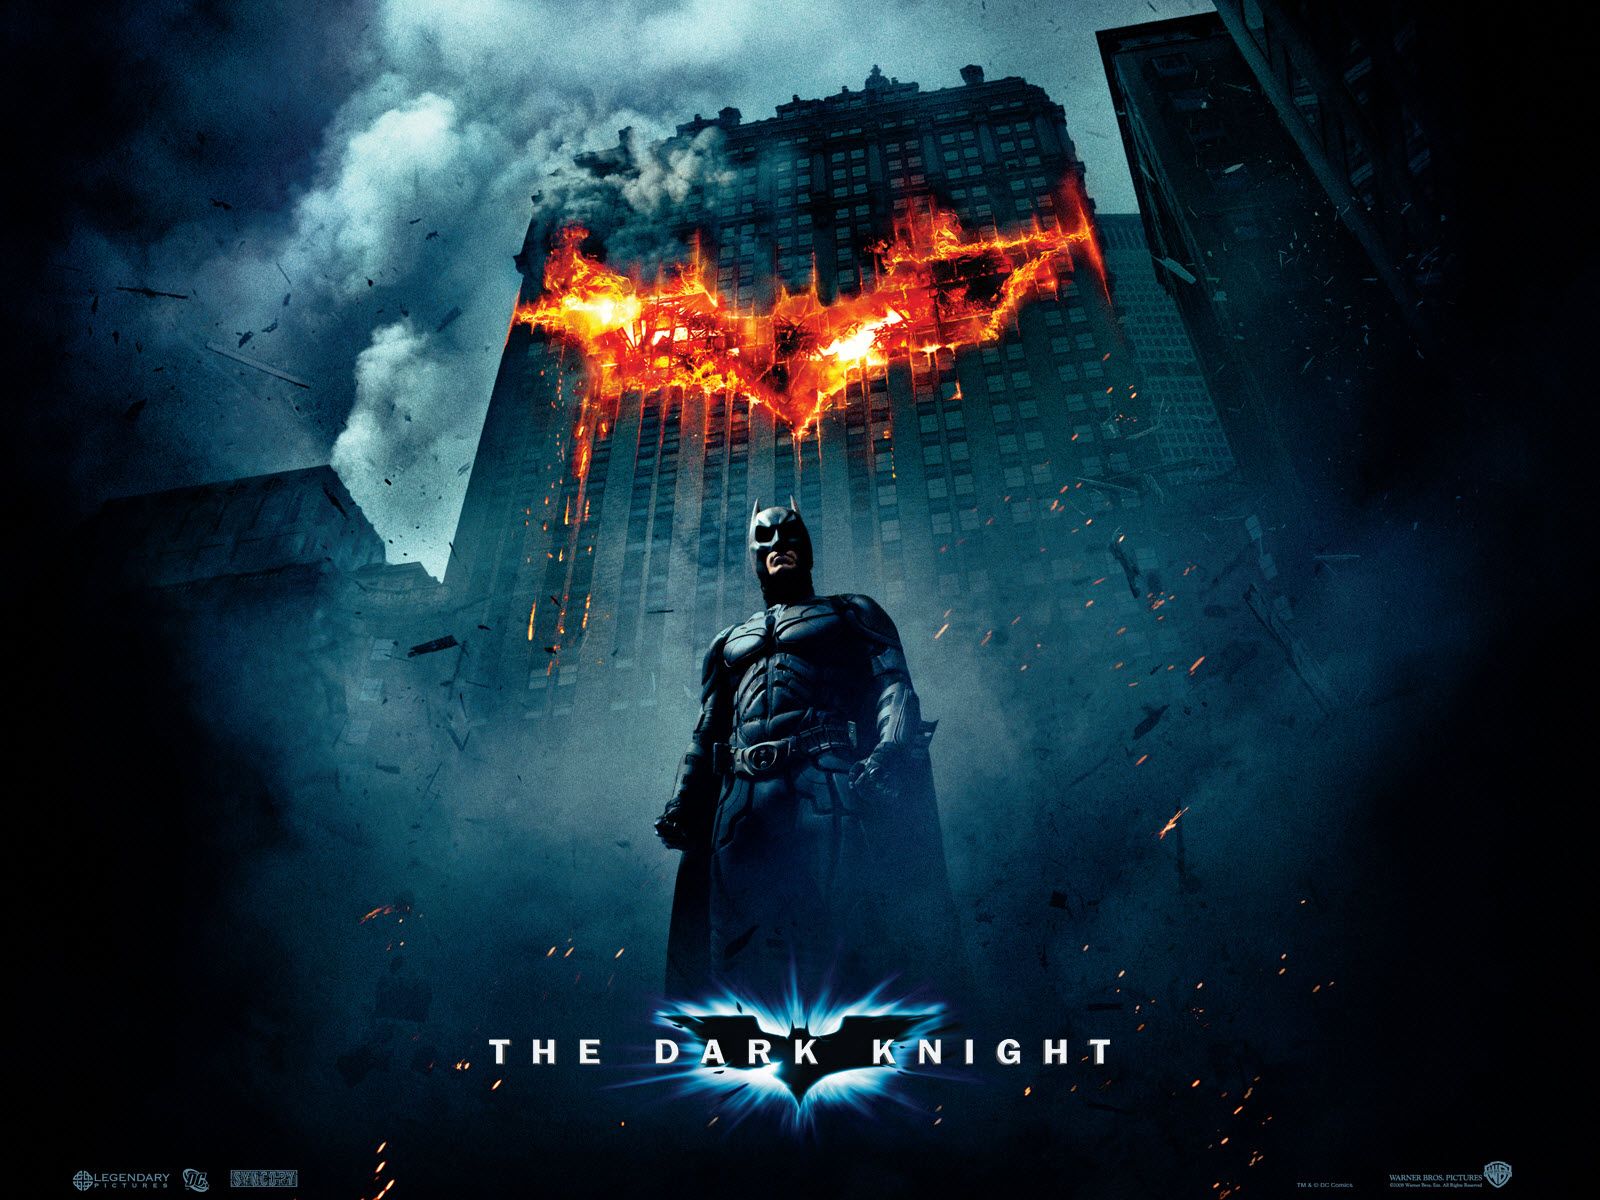 The Dark Knight Movie Wallpapers | HD Wallpapers